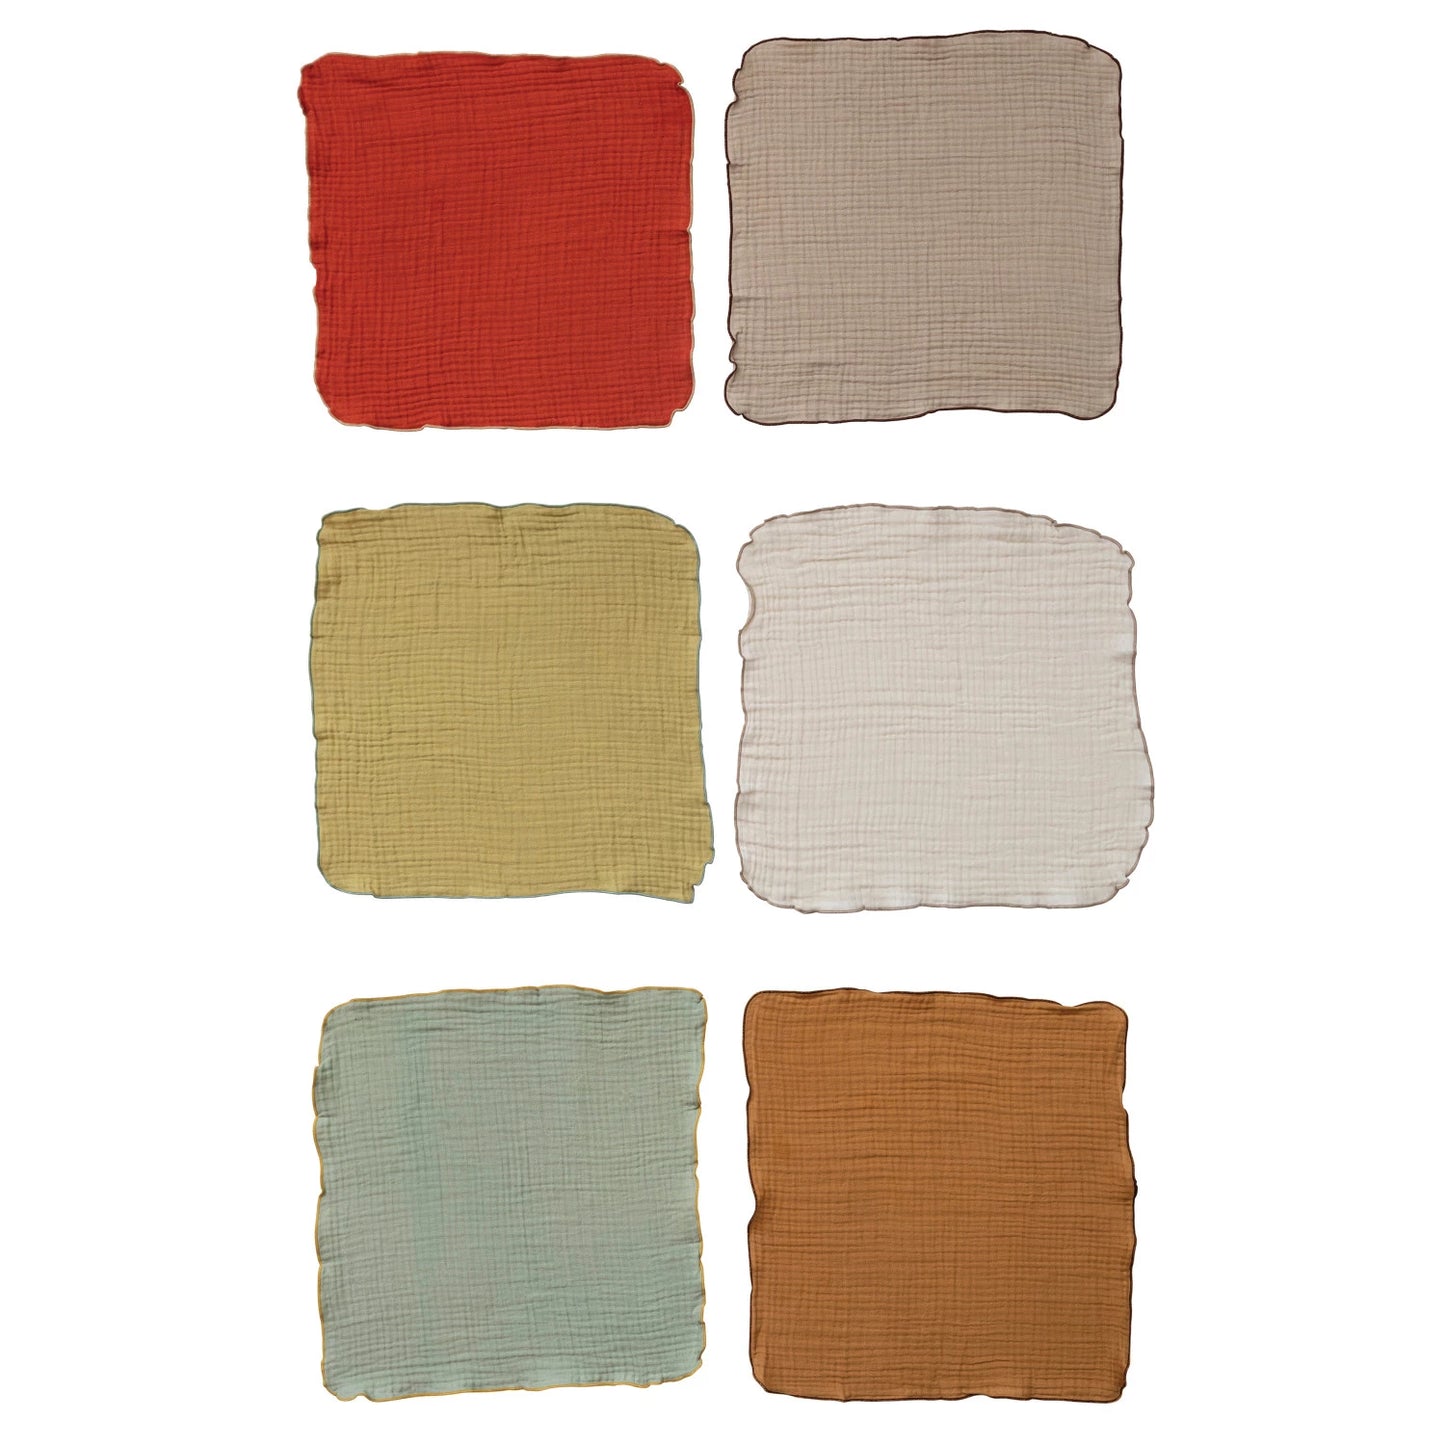 all six colors of contrasting stitched edge cloth napkins laying unfolded against a white background